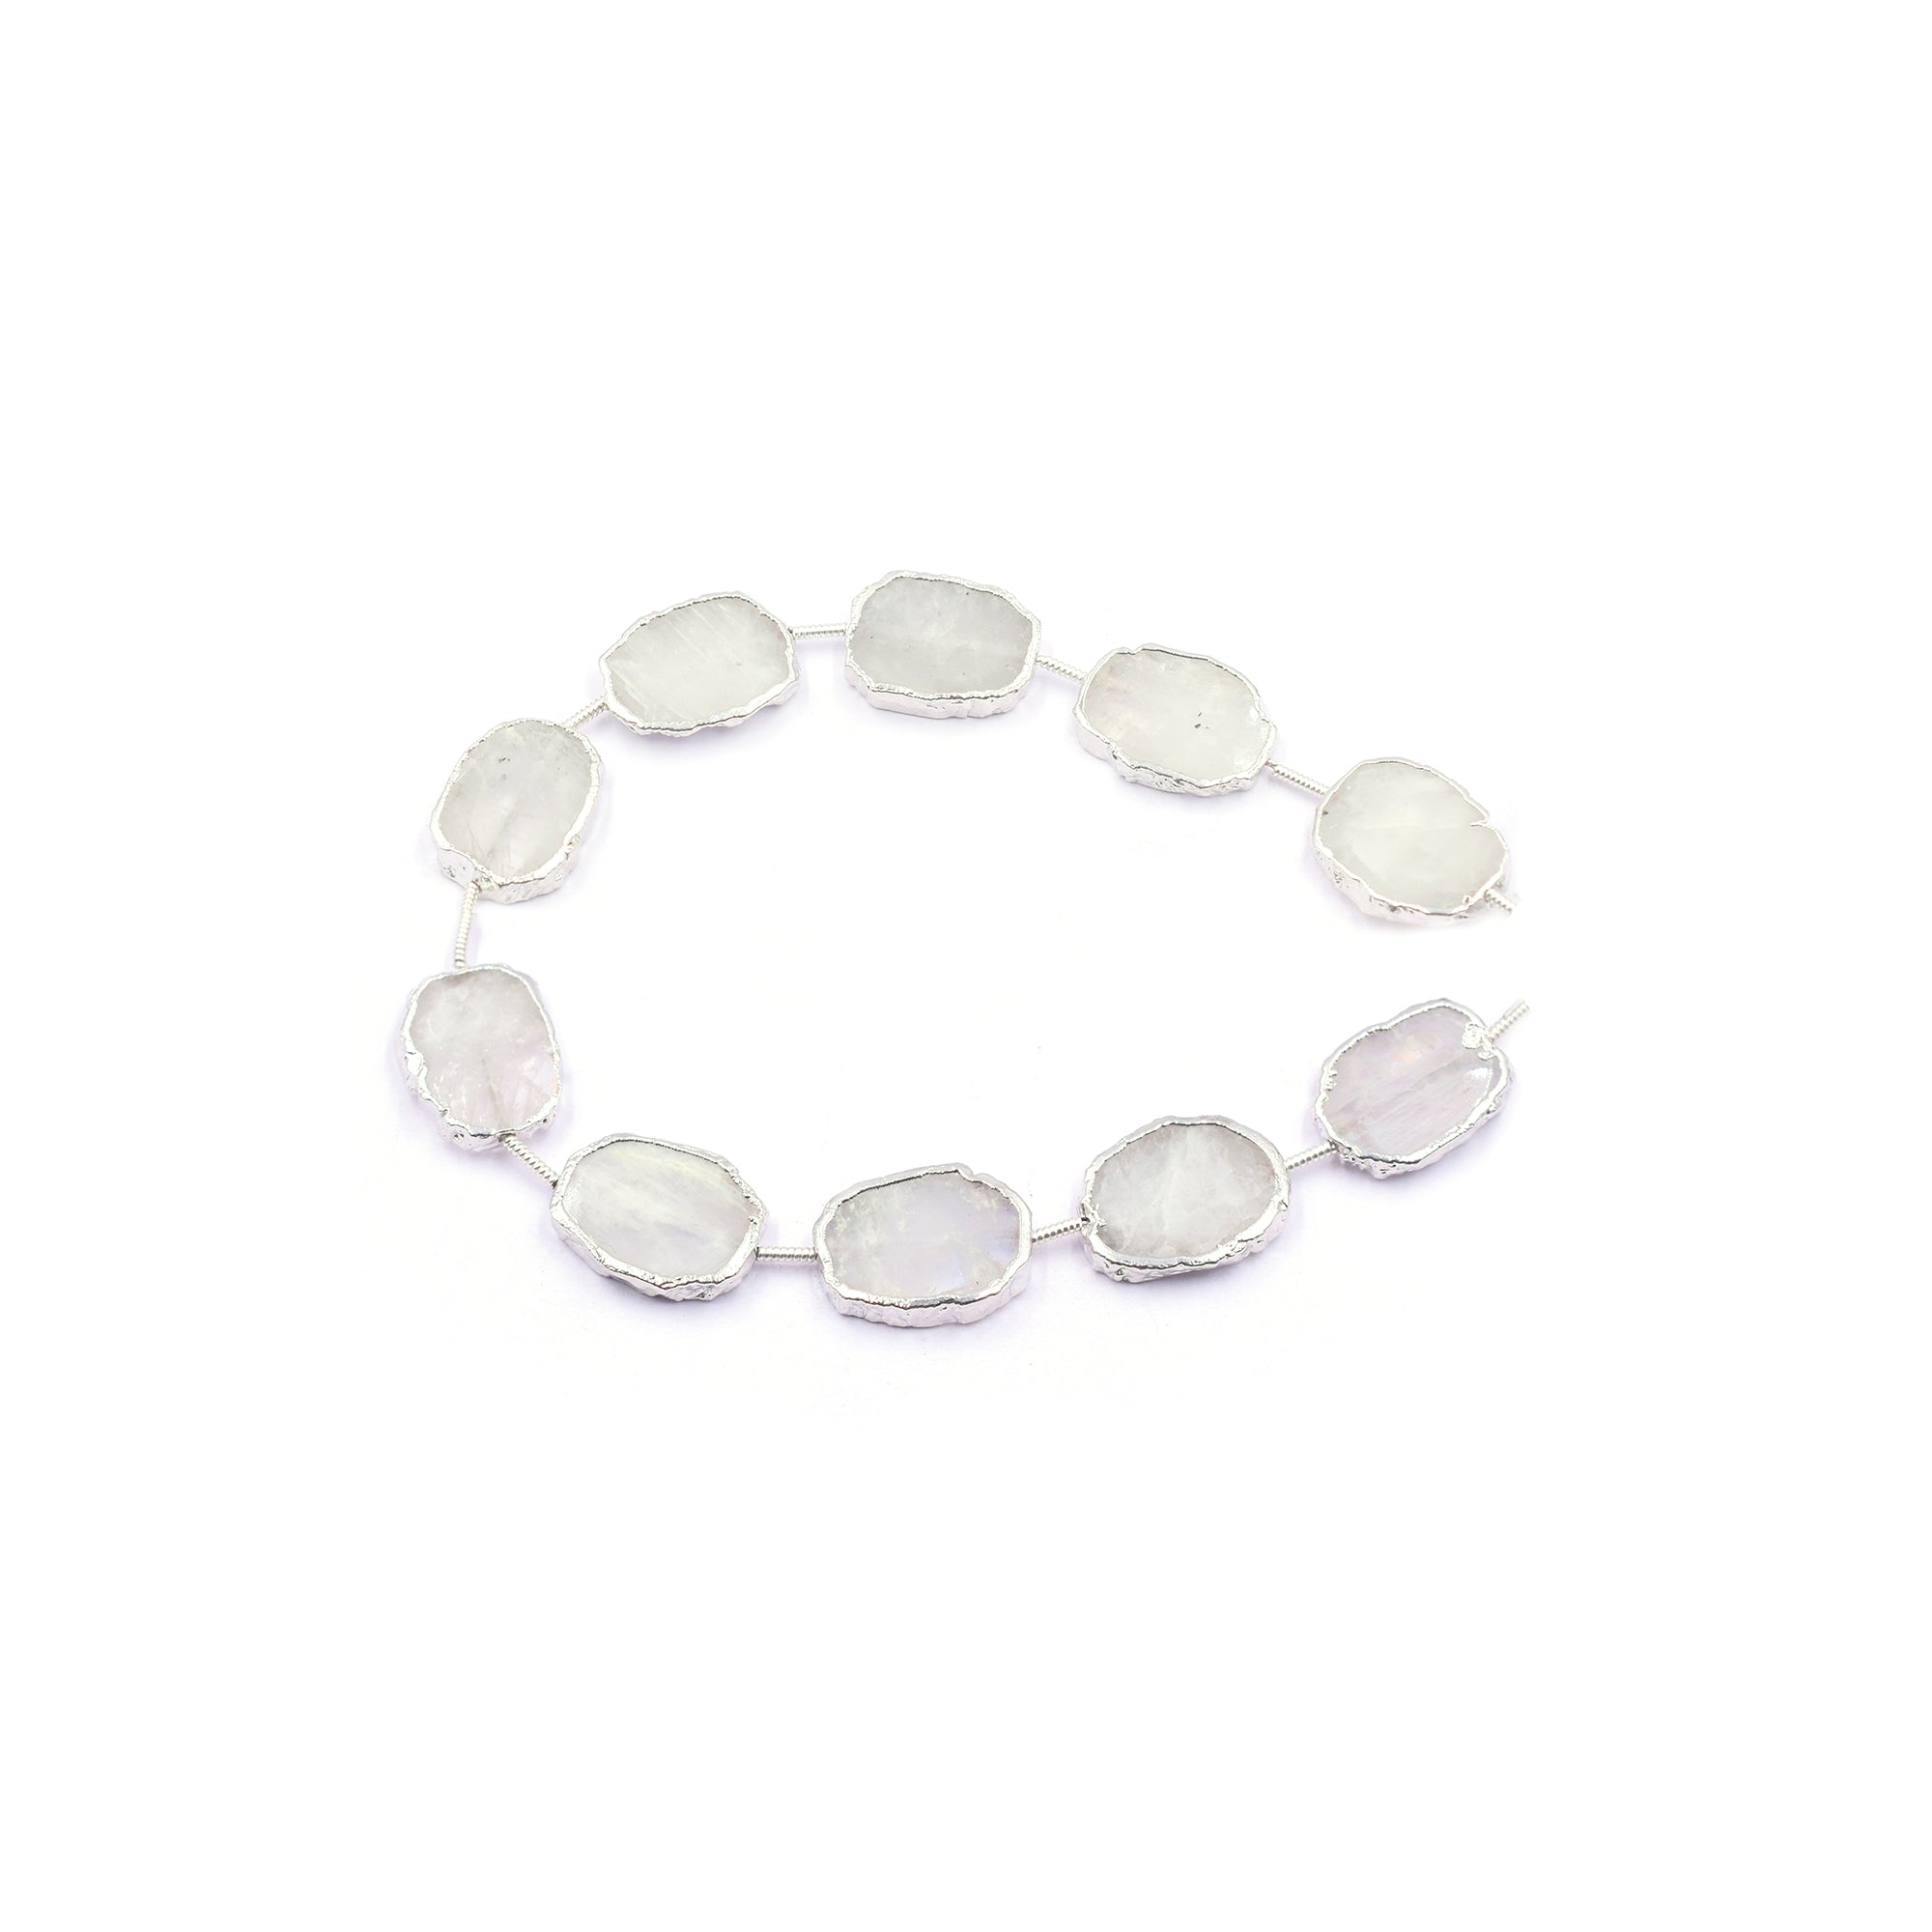 Rainbow Moonstone 15X12 MM Uneven Shape Straight Drilled Rhodium Electroplated Strand